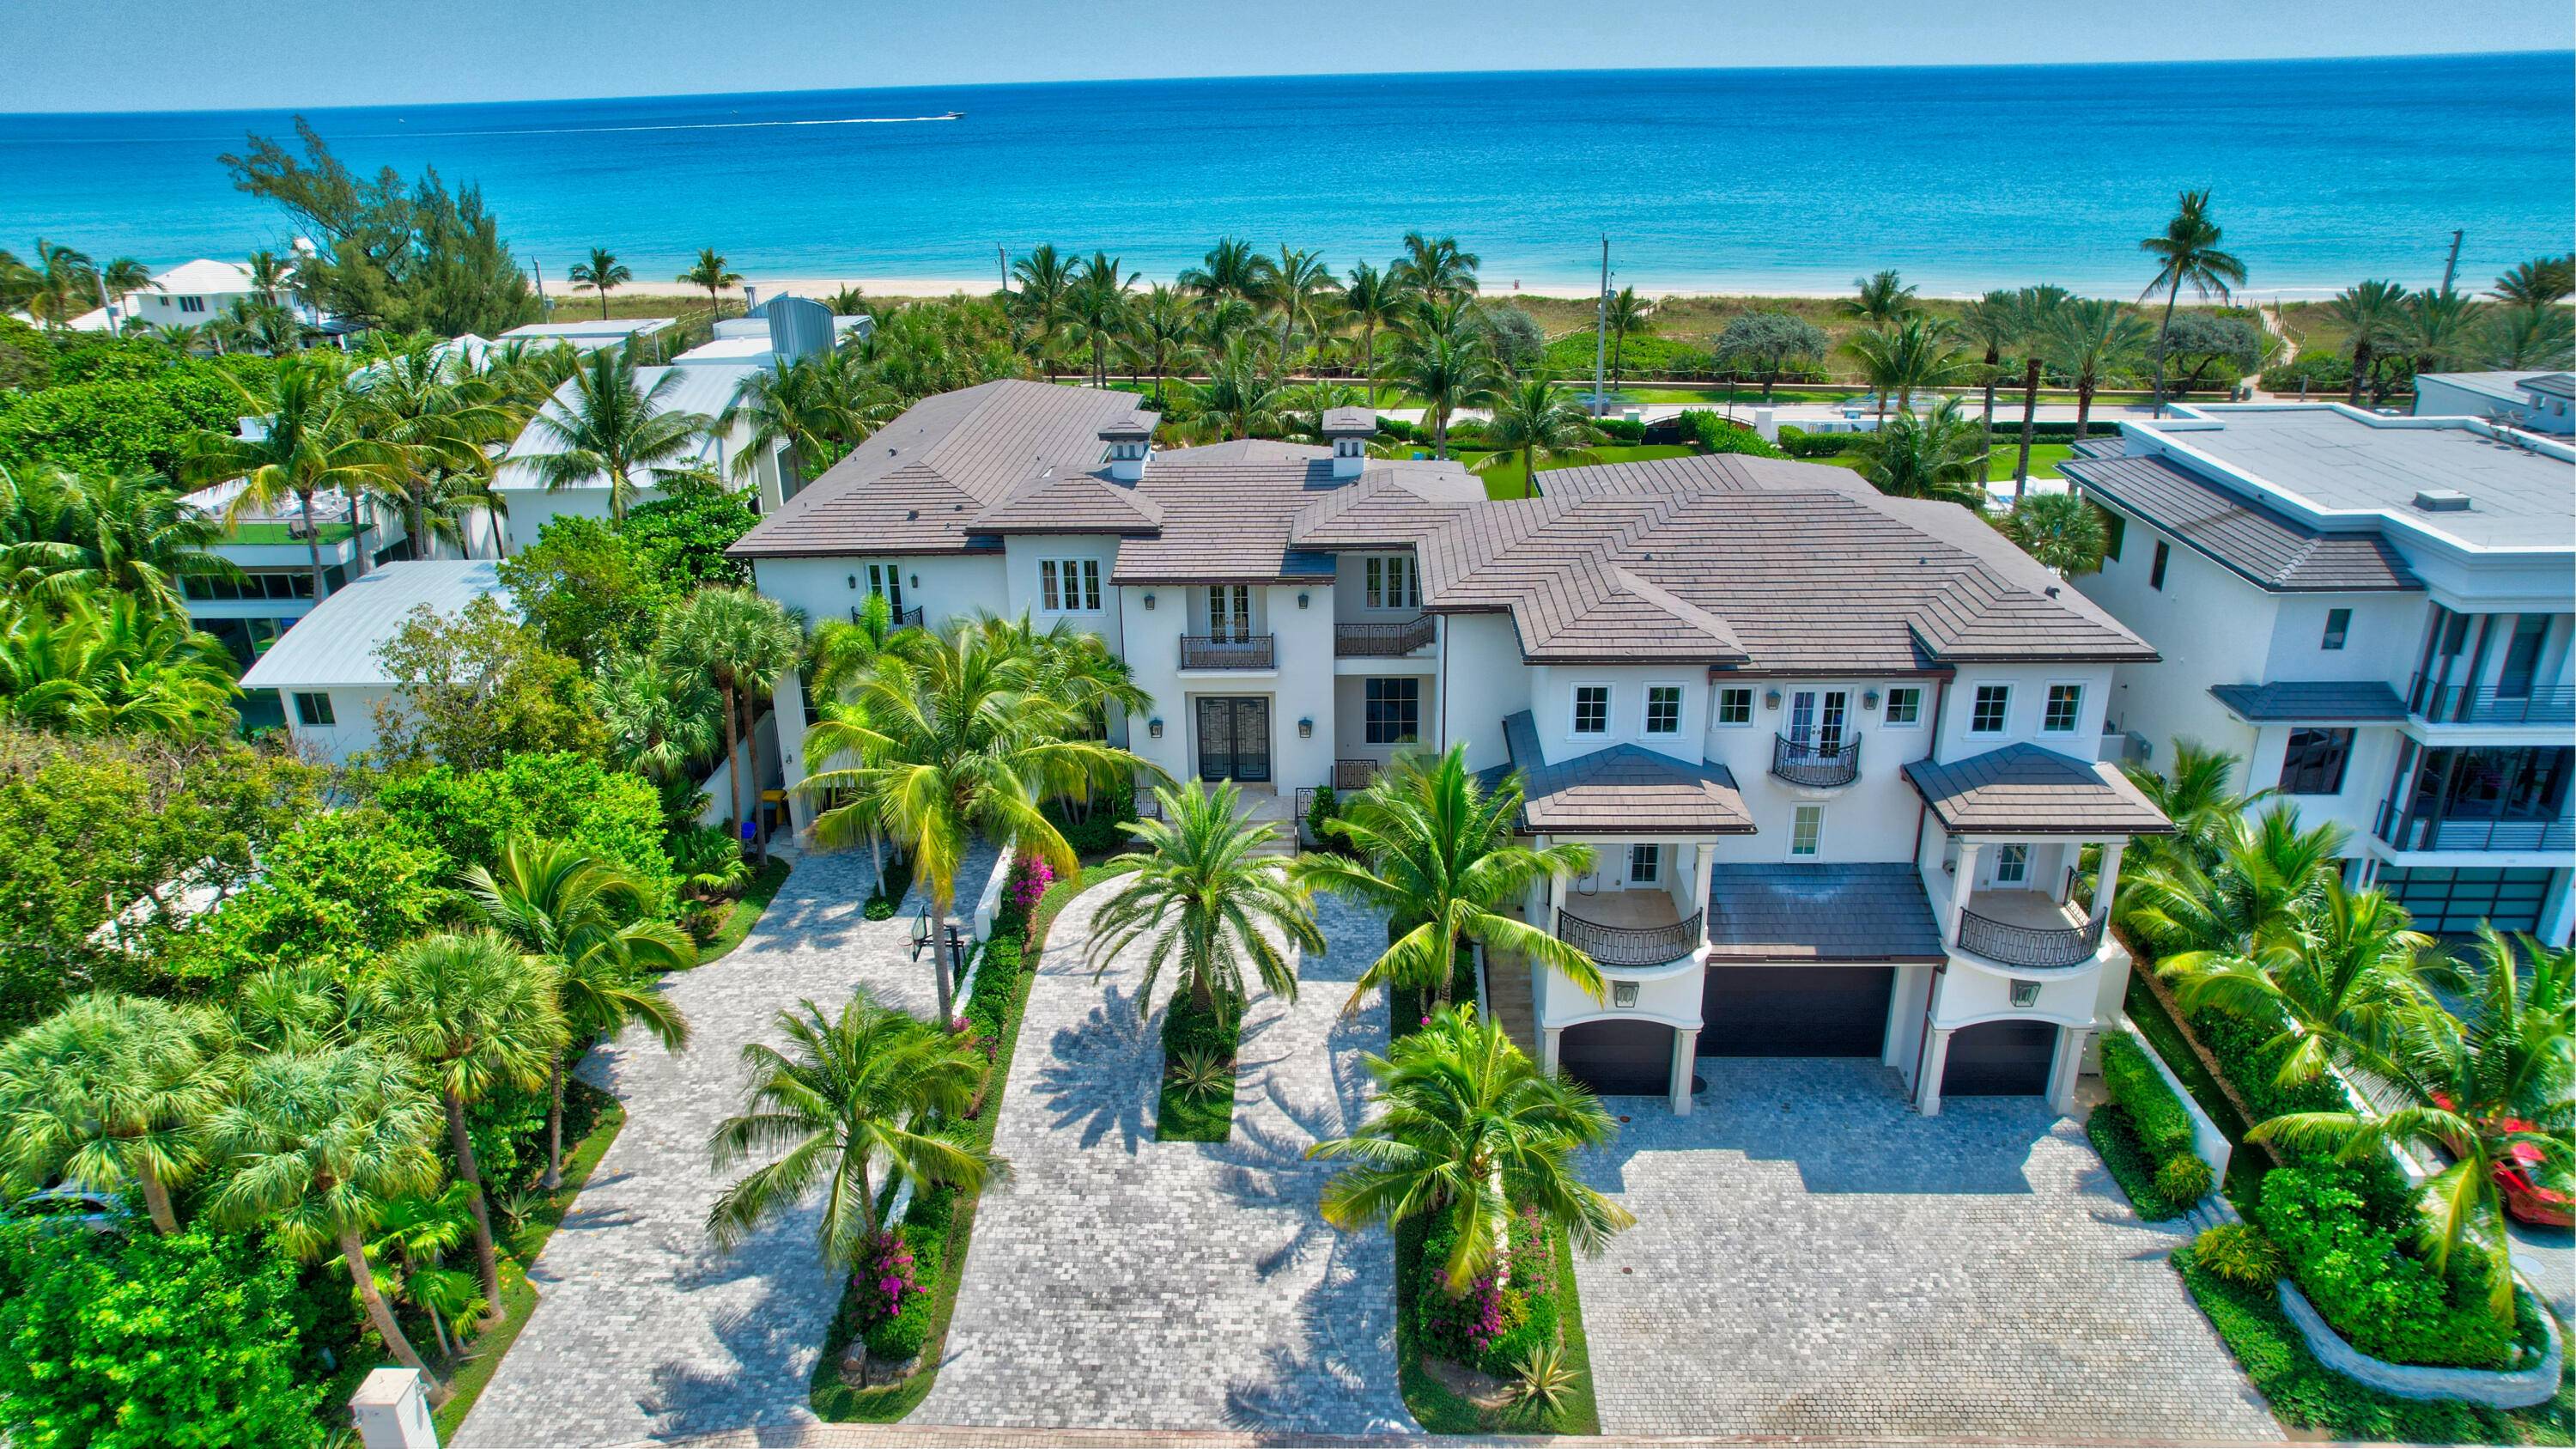 STUNNING 5 BEDROOM OCEAN ESTATE WITH A 2 BEDROOM GUEST HOUSE.